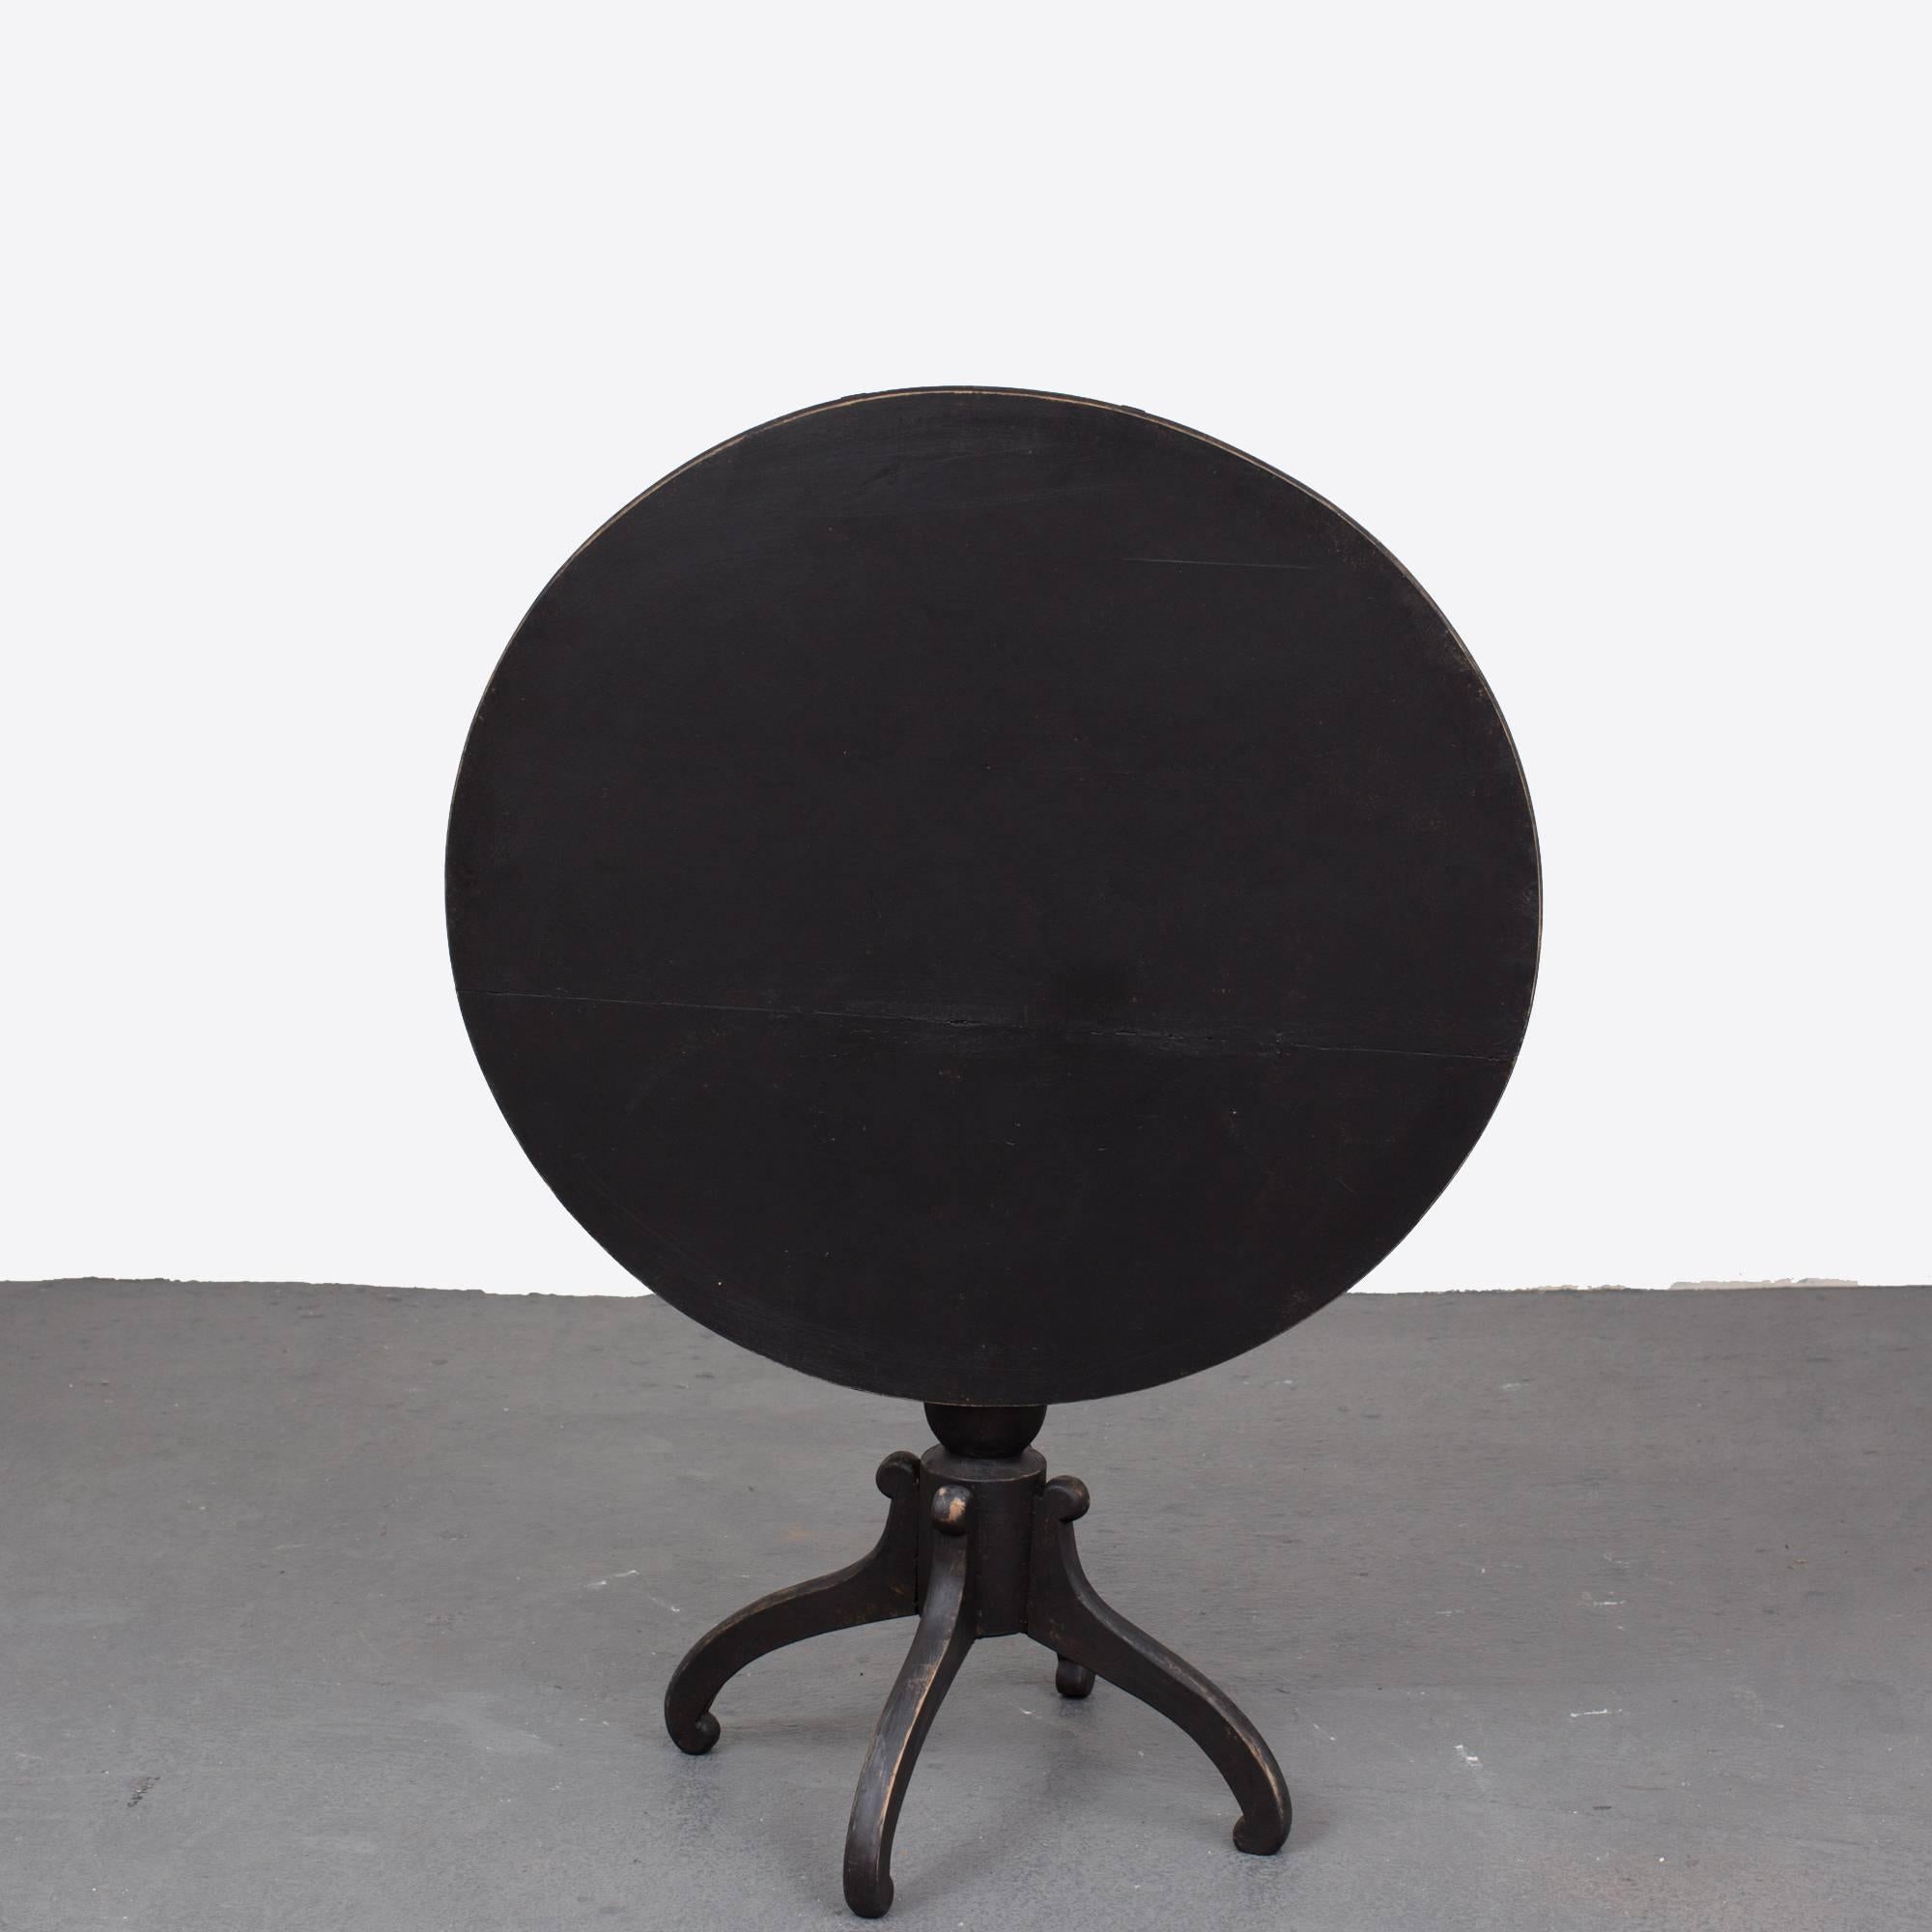 Table Side Swedish Round Black 1880s, Sweden. A round side table on a centre pedestal made during the 1880s in Sweden. Painted in our custom paint 